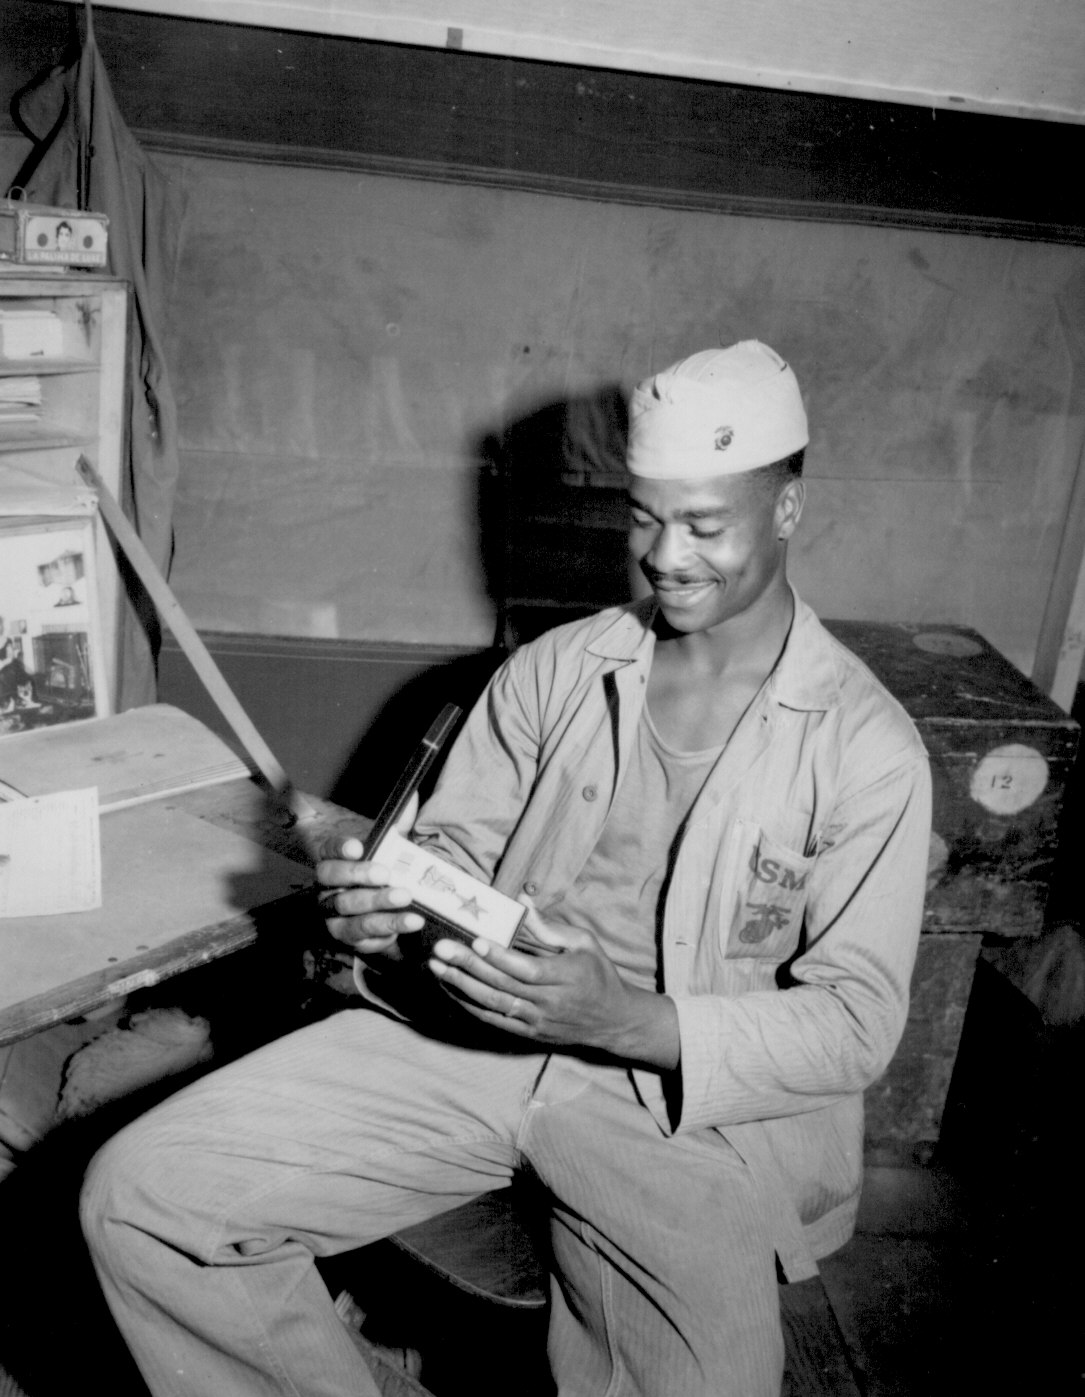 African-American US Marine 4th Ammunition Company Private First Class Luther Woodward admiring his Bronze Star medal, 17 Apr 1945; his award was later upgraded to the Silver Star